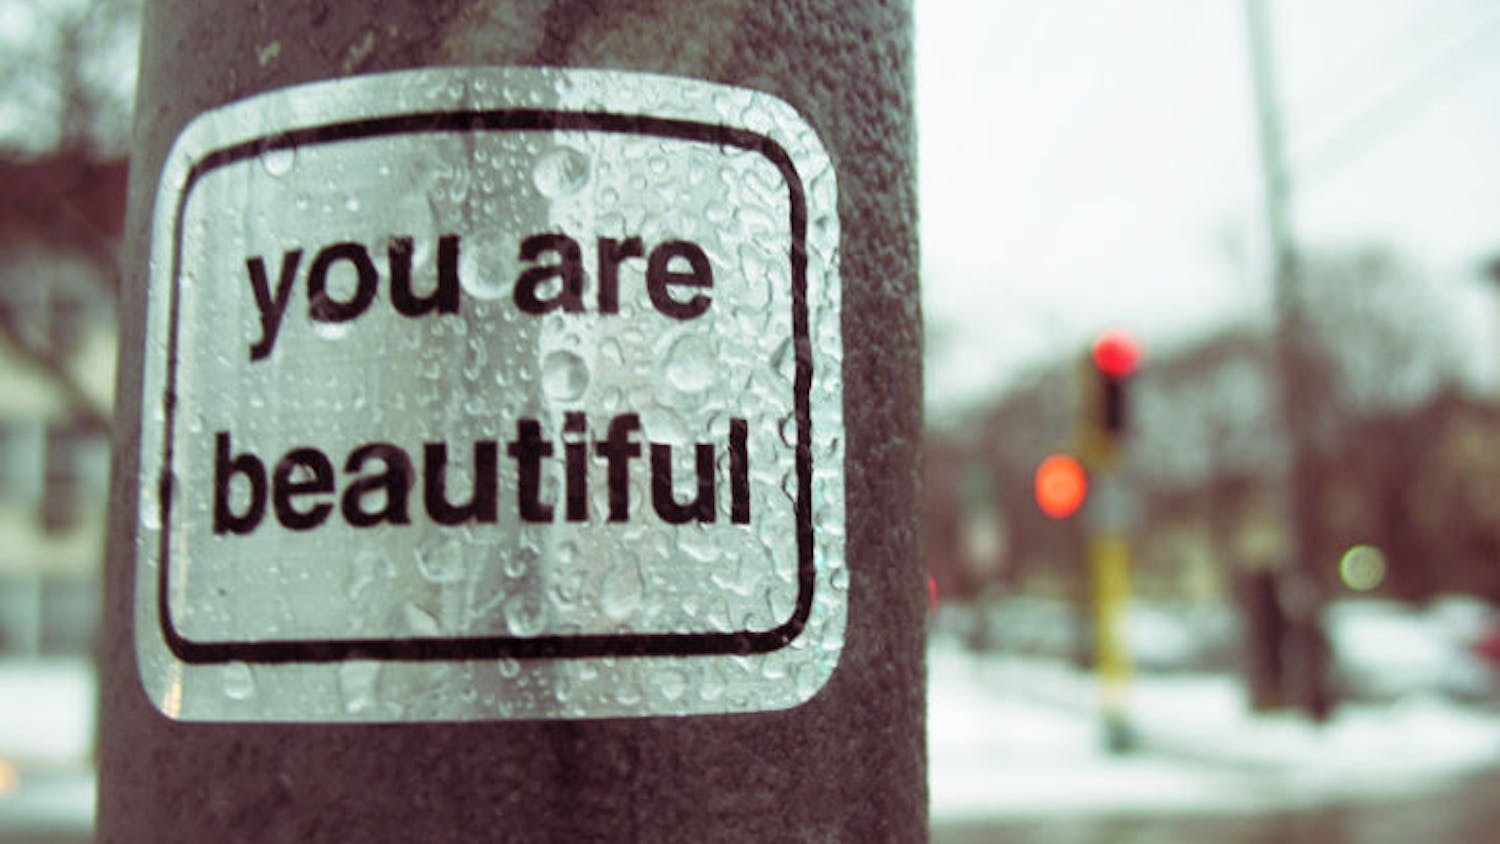 "You Are Beautiful" by Jenna, used under CC BY 2.0